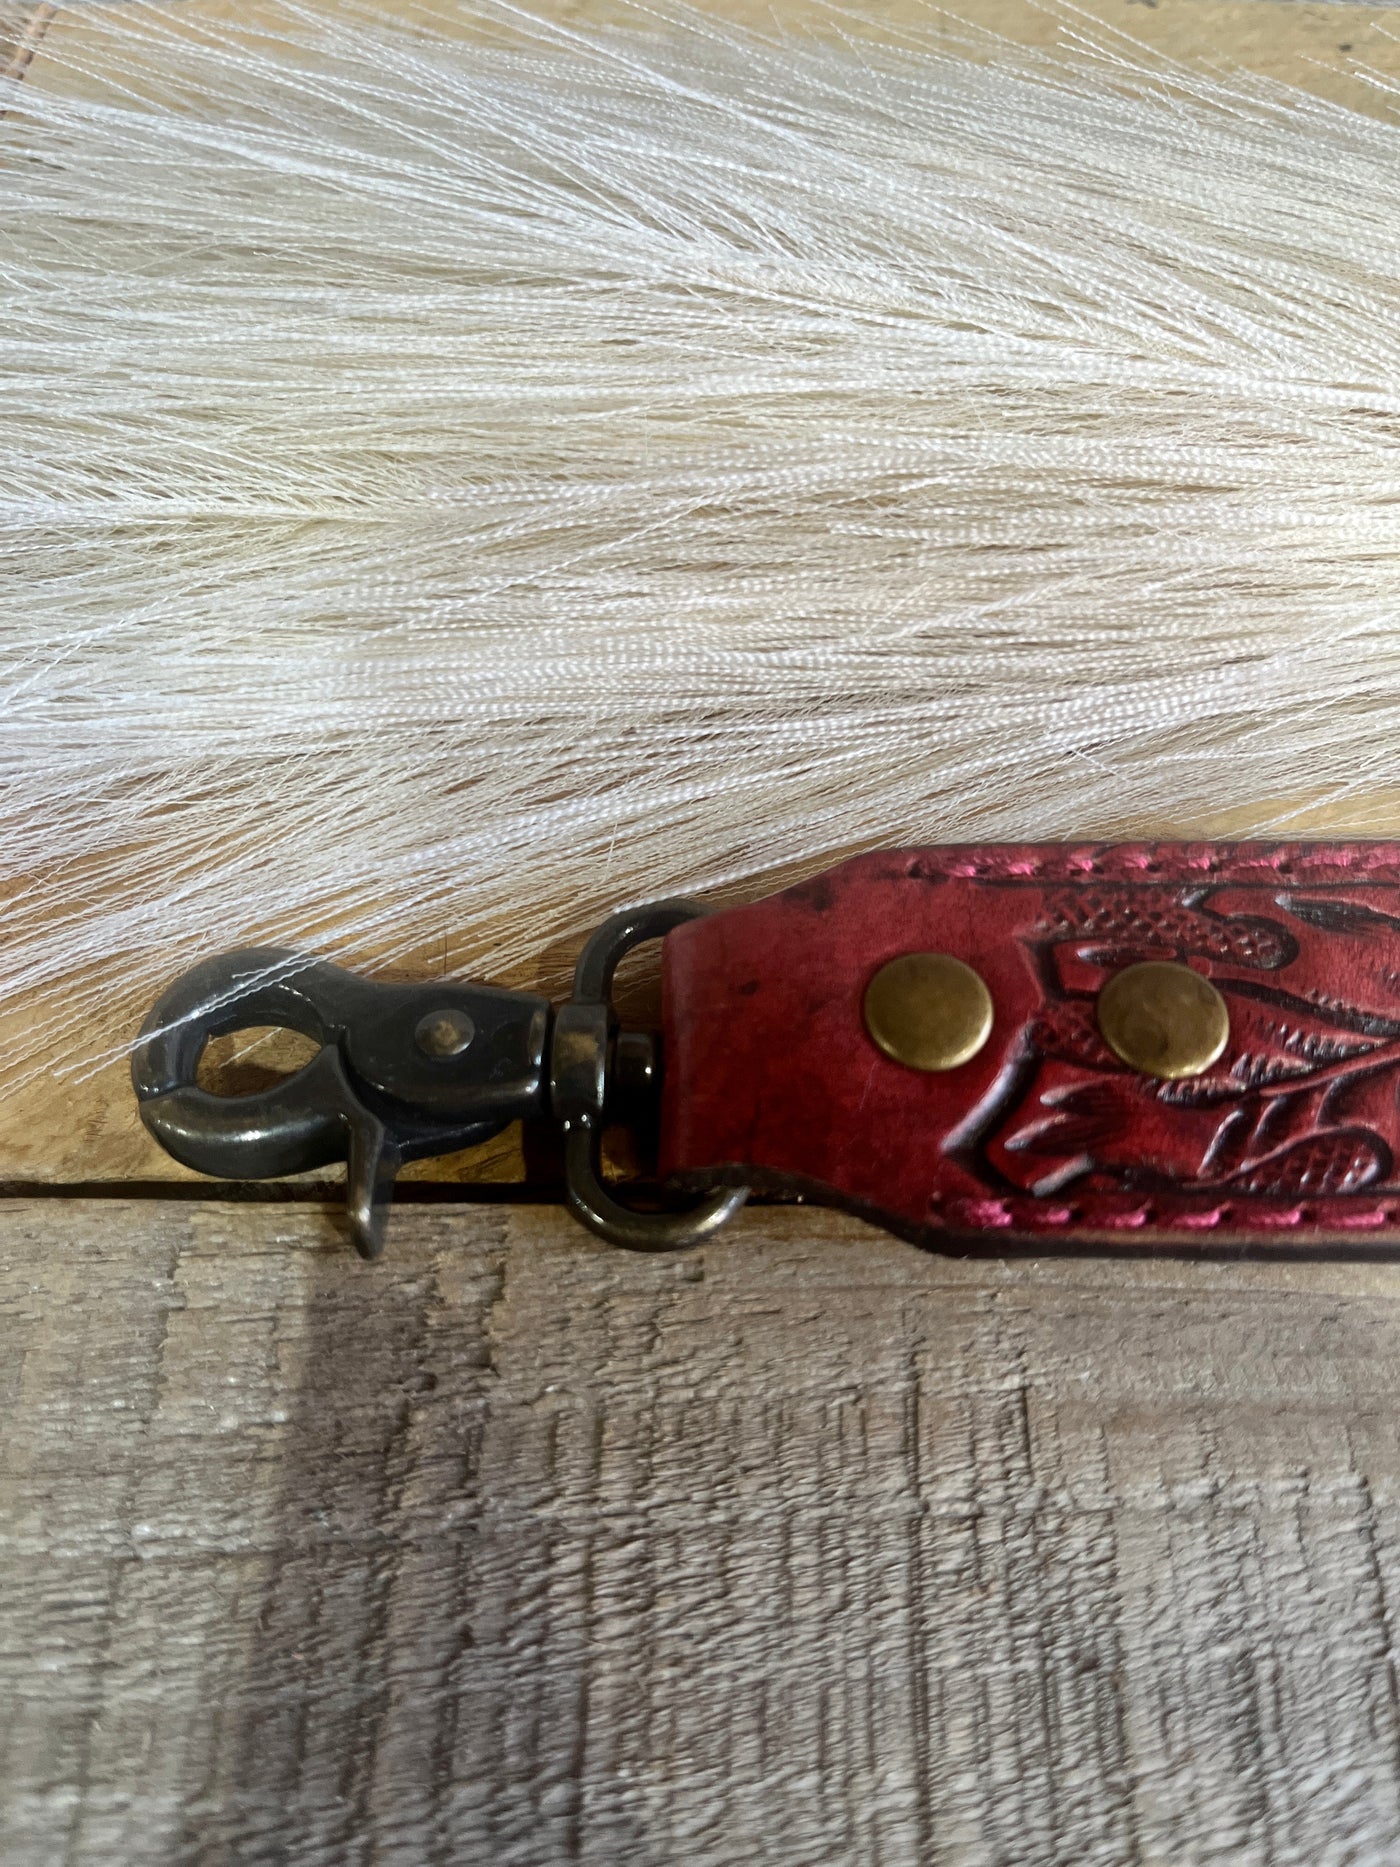 Garth Tooled Leather Purse Strap